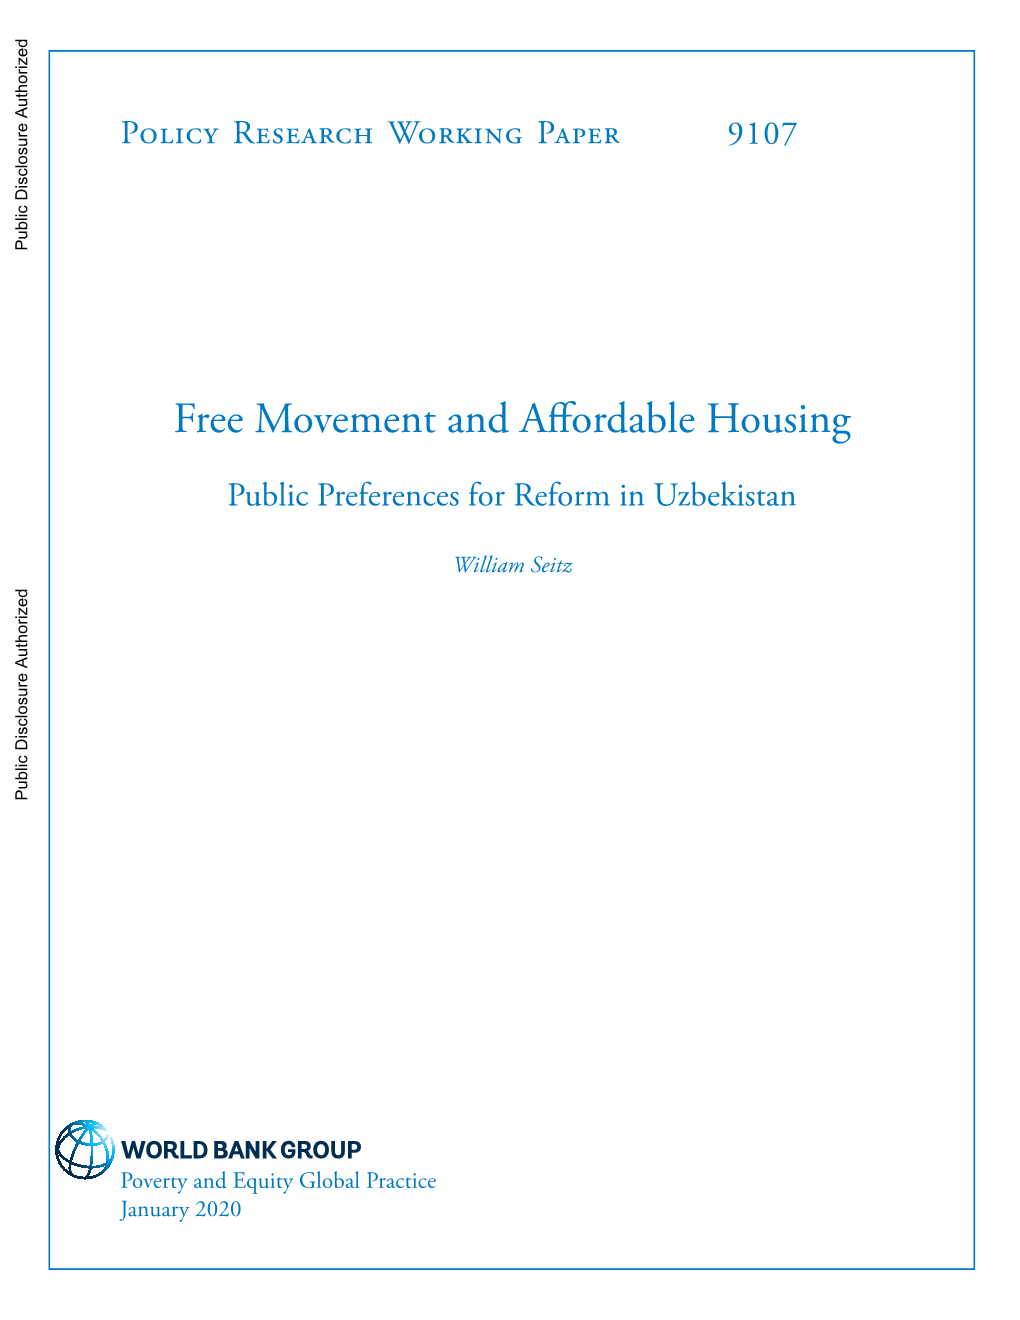 Free Movement and Affordable Housing